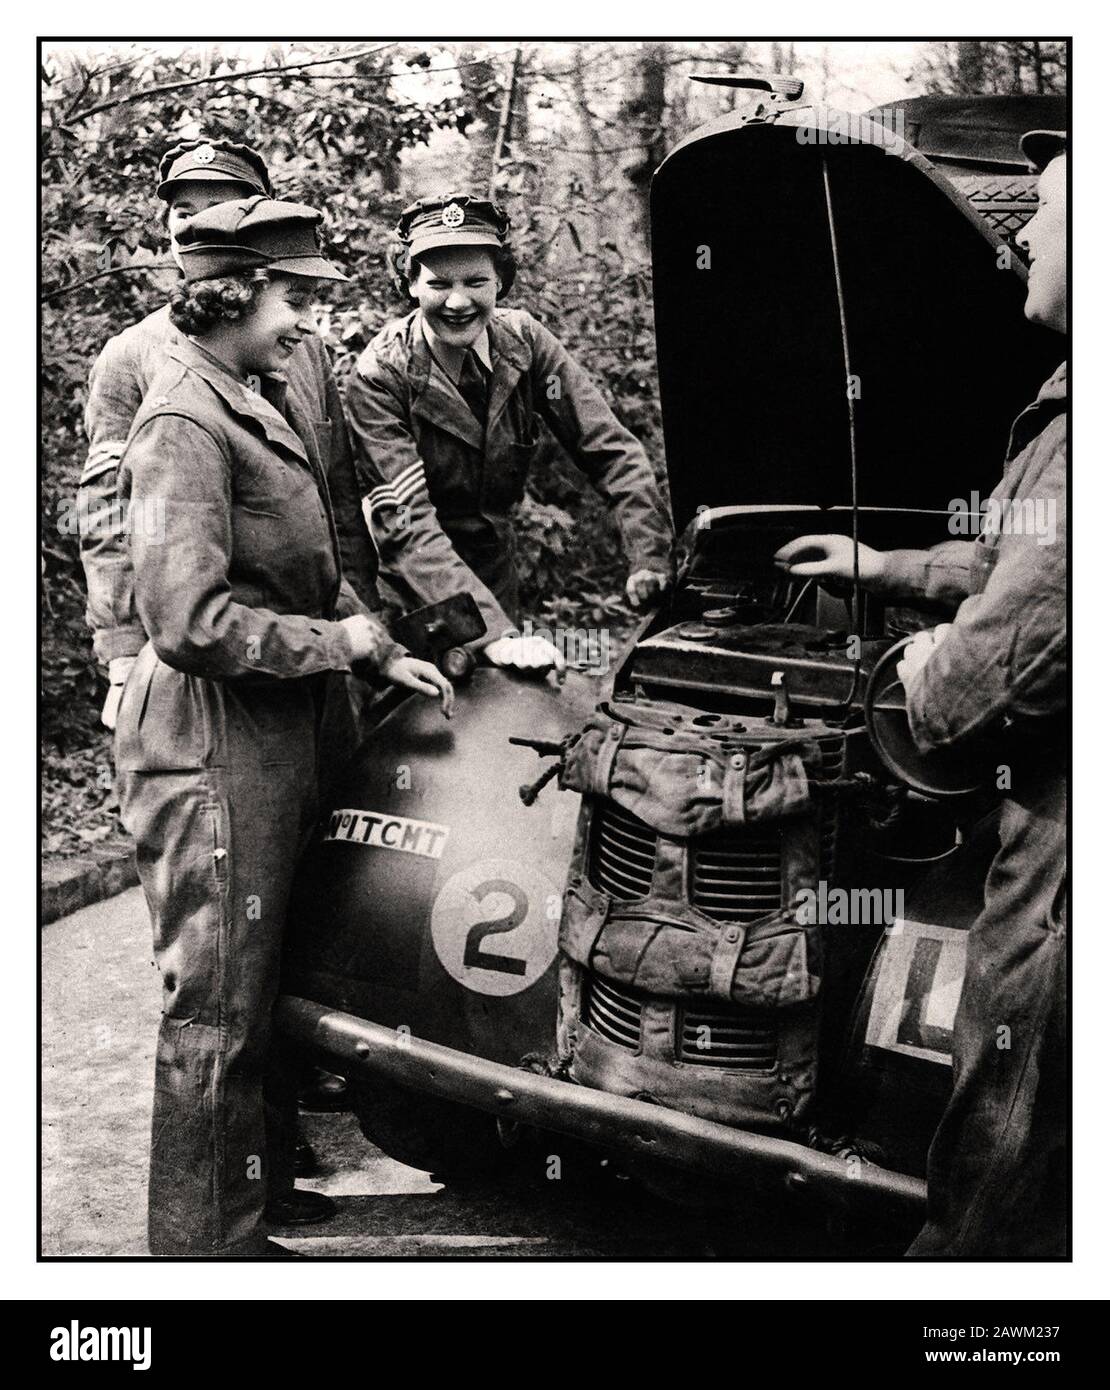 Princess Elizabeth ATS 1940's World War II Car Mechanic. HRH Princess Elizabeth (future Queen Elizabeth II) in her uniform of the ATS The Auxiliary Territorial Service a women’s army auxiliary branch, with other smiling ATS service members working on and servicing a British Army military vehicle. Stock Photo